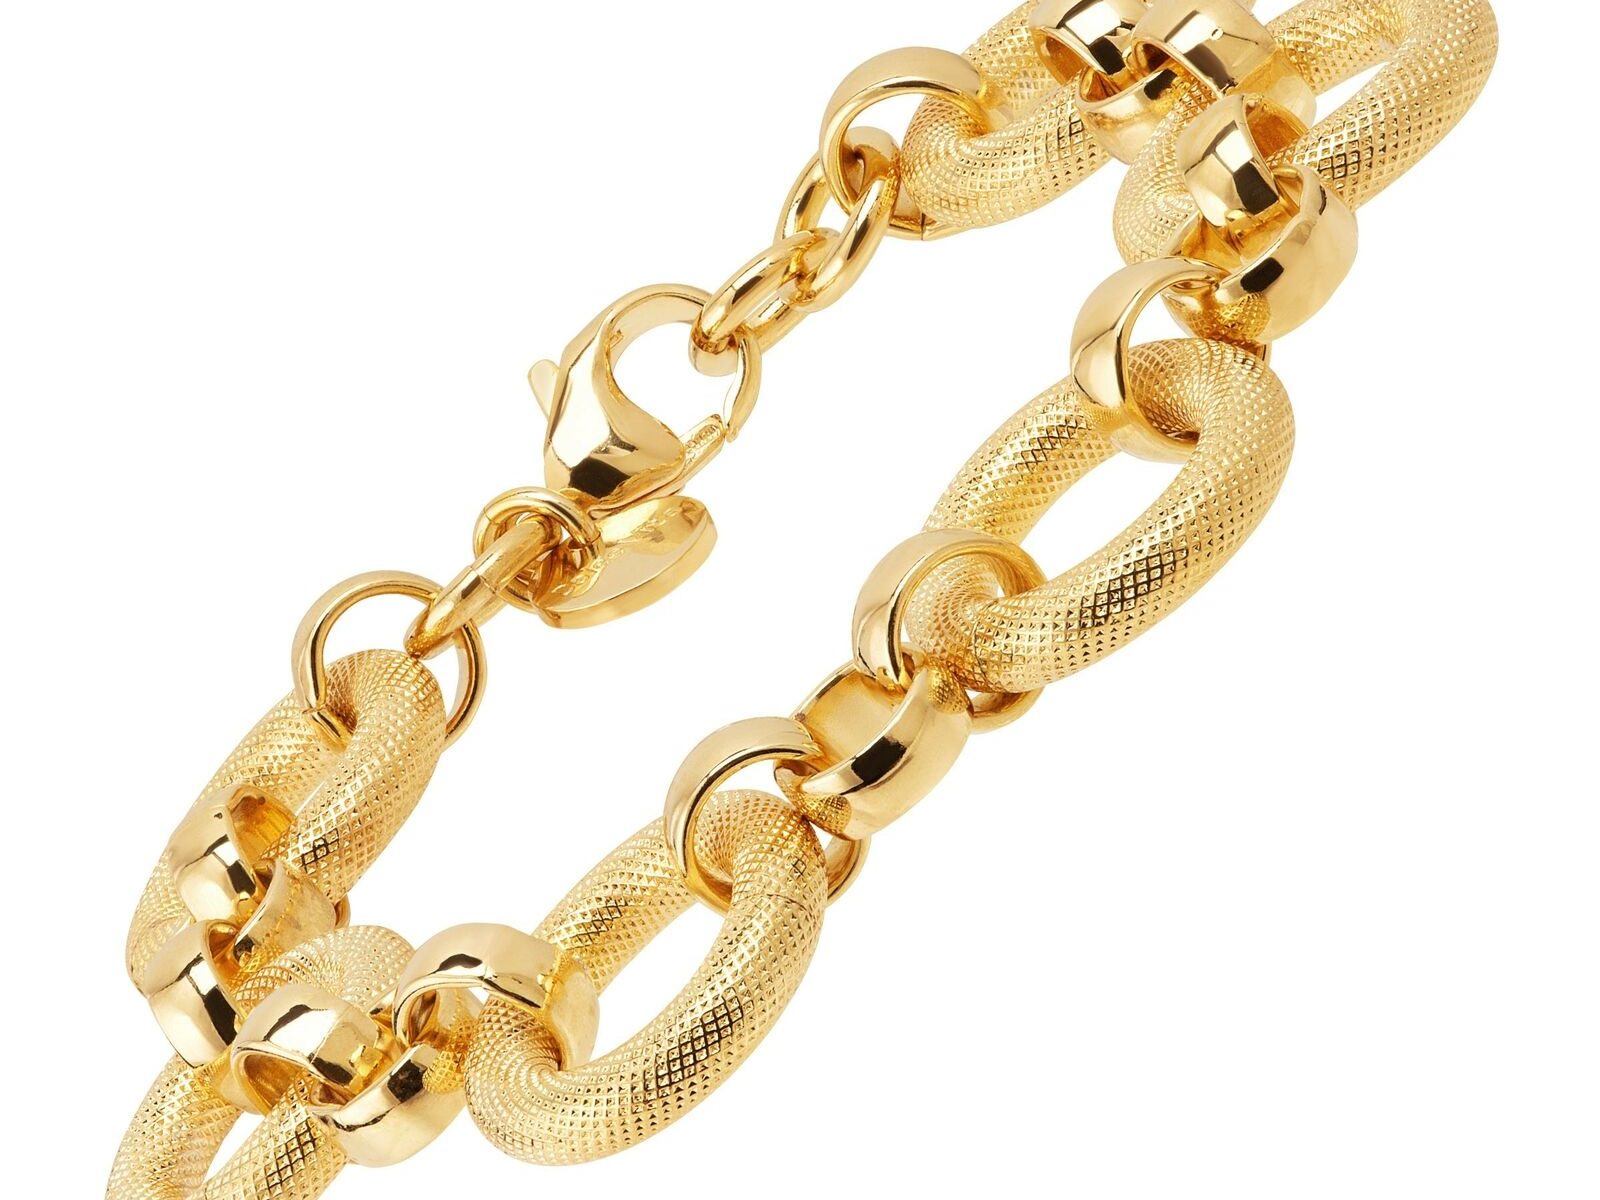 'Italian-made Circle Bracelet in 18K Gold-Plated Bronze, 8"